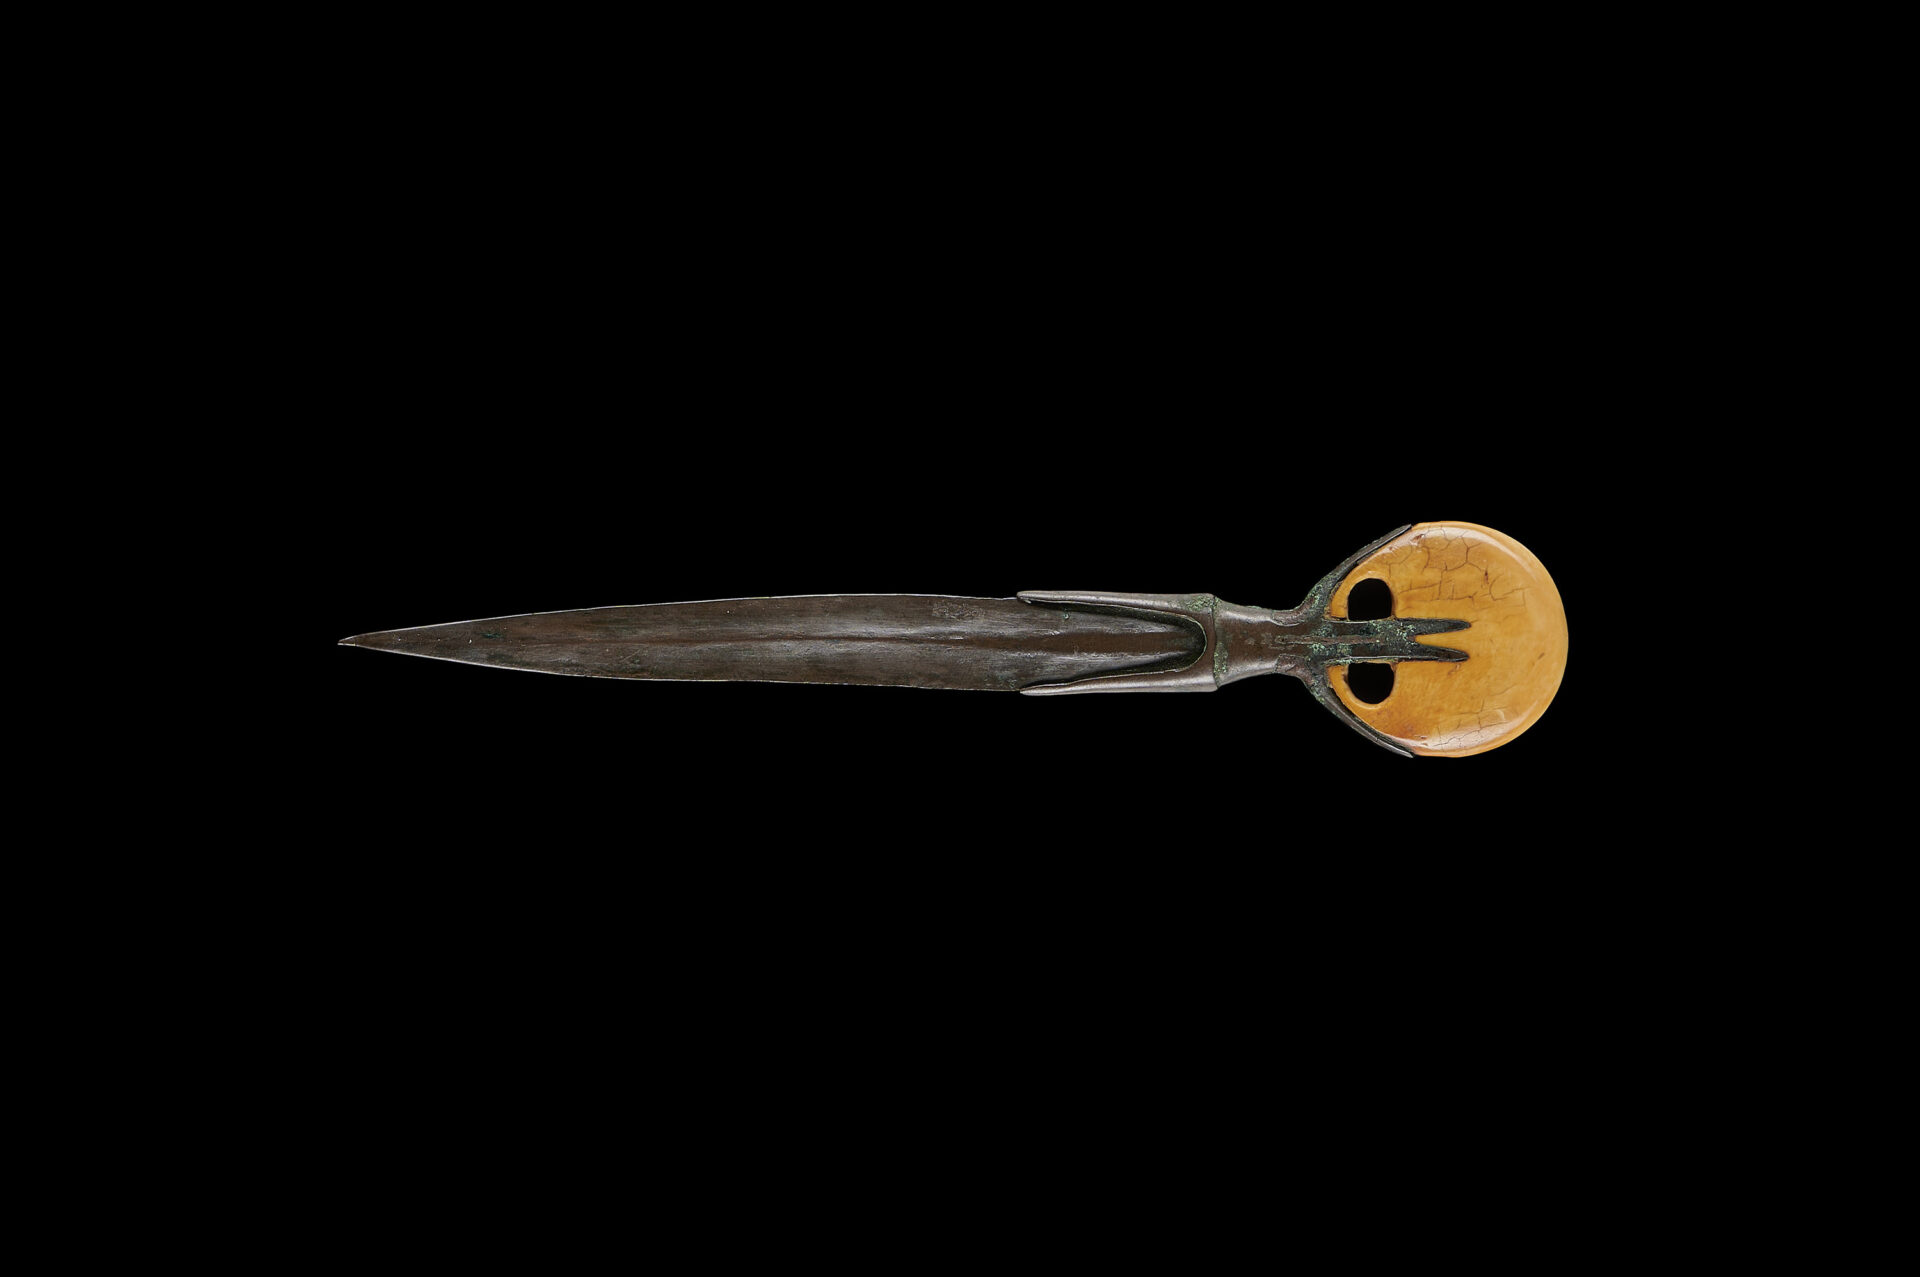 Egyptian bronze dagger with ivory pommel. 17th-early 18th dynasty